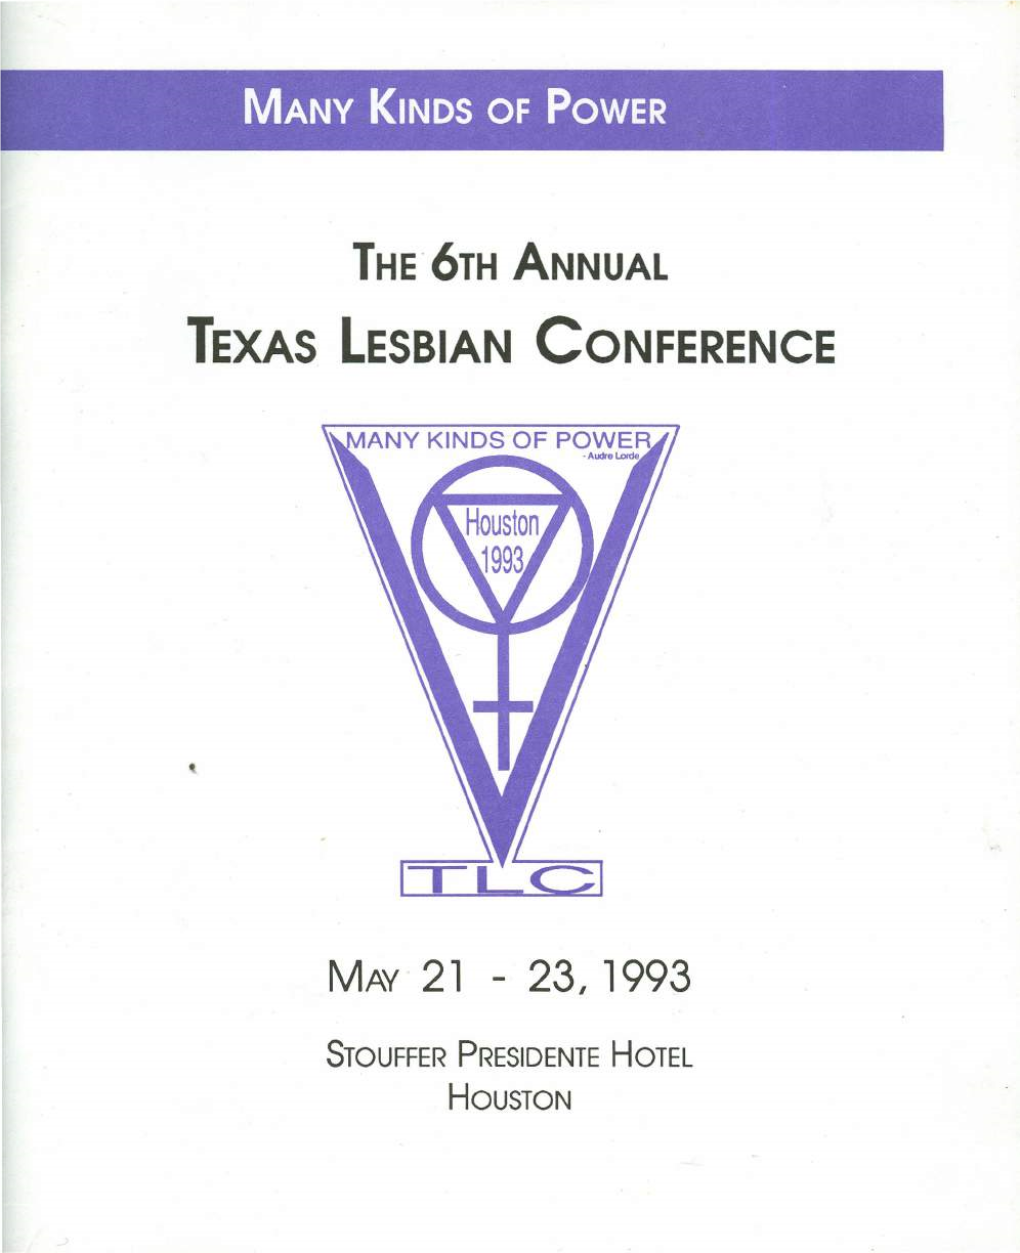 Texas Lesbian Conference